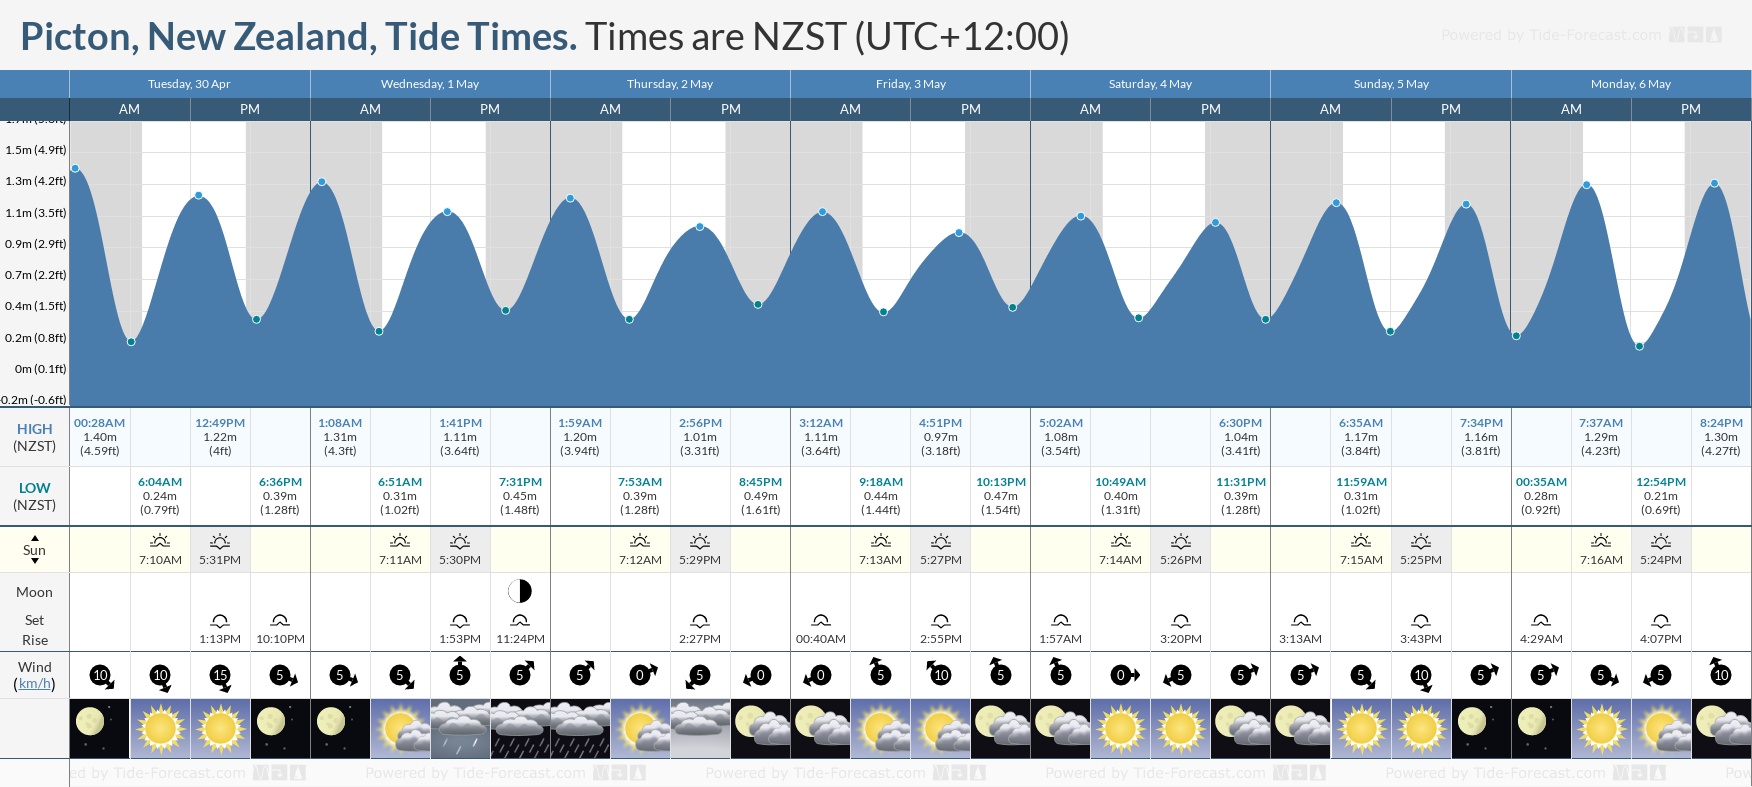 Picton, New Zealand Tide Chart including high and low tide tide times for the next 7 days